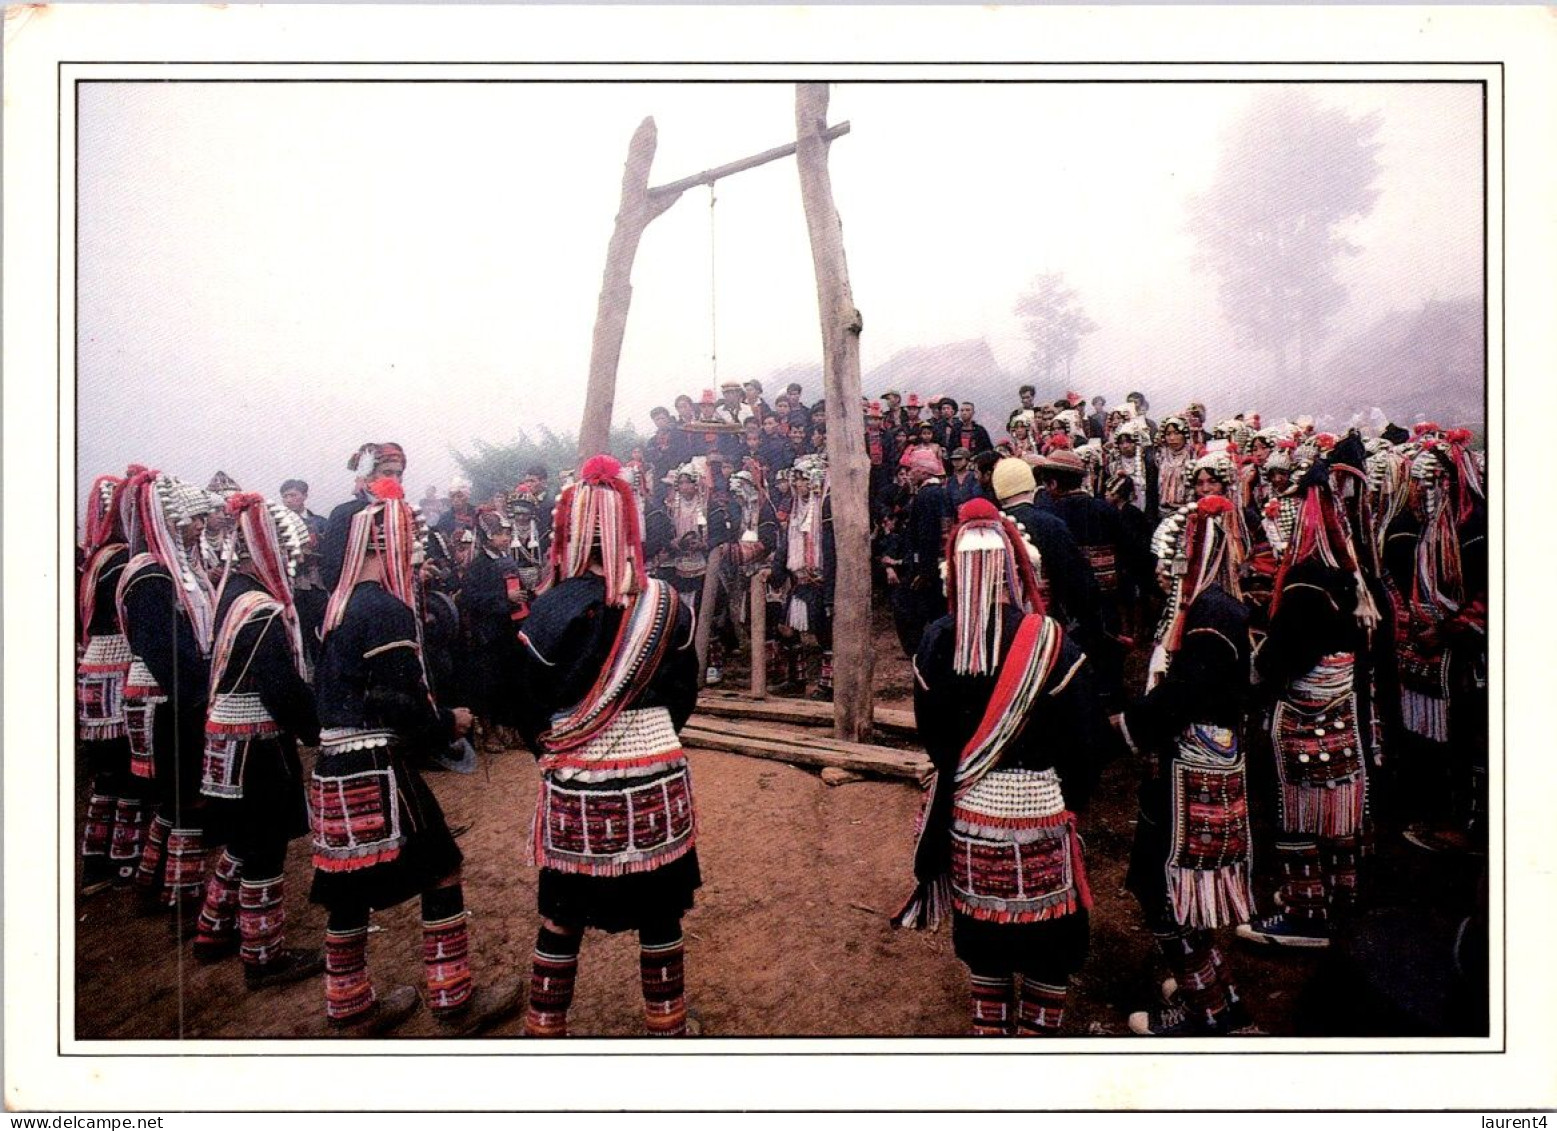 11-3-2025 (2 Y 44) Thailand - Akha Tribe Peoples Sing & Dance Festival - Tailandia